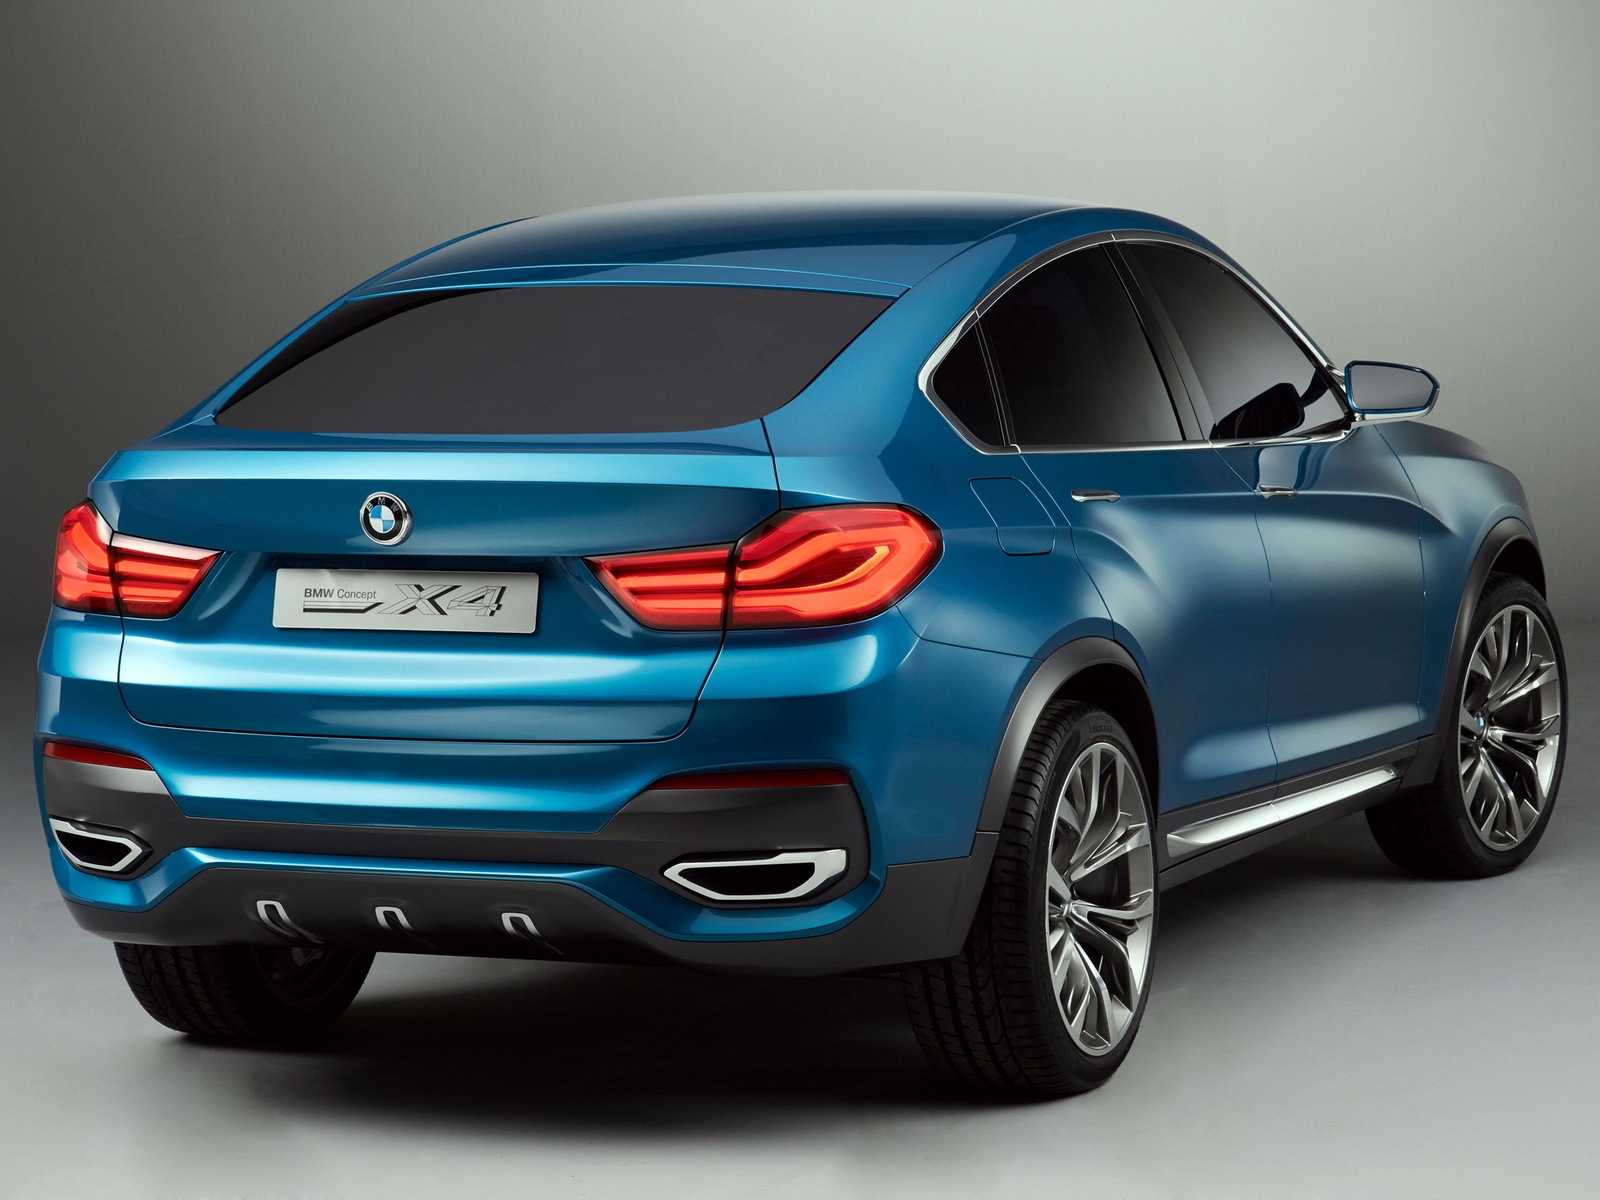 BMW X4 Back View for 1600 x 1200 resolution